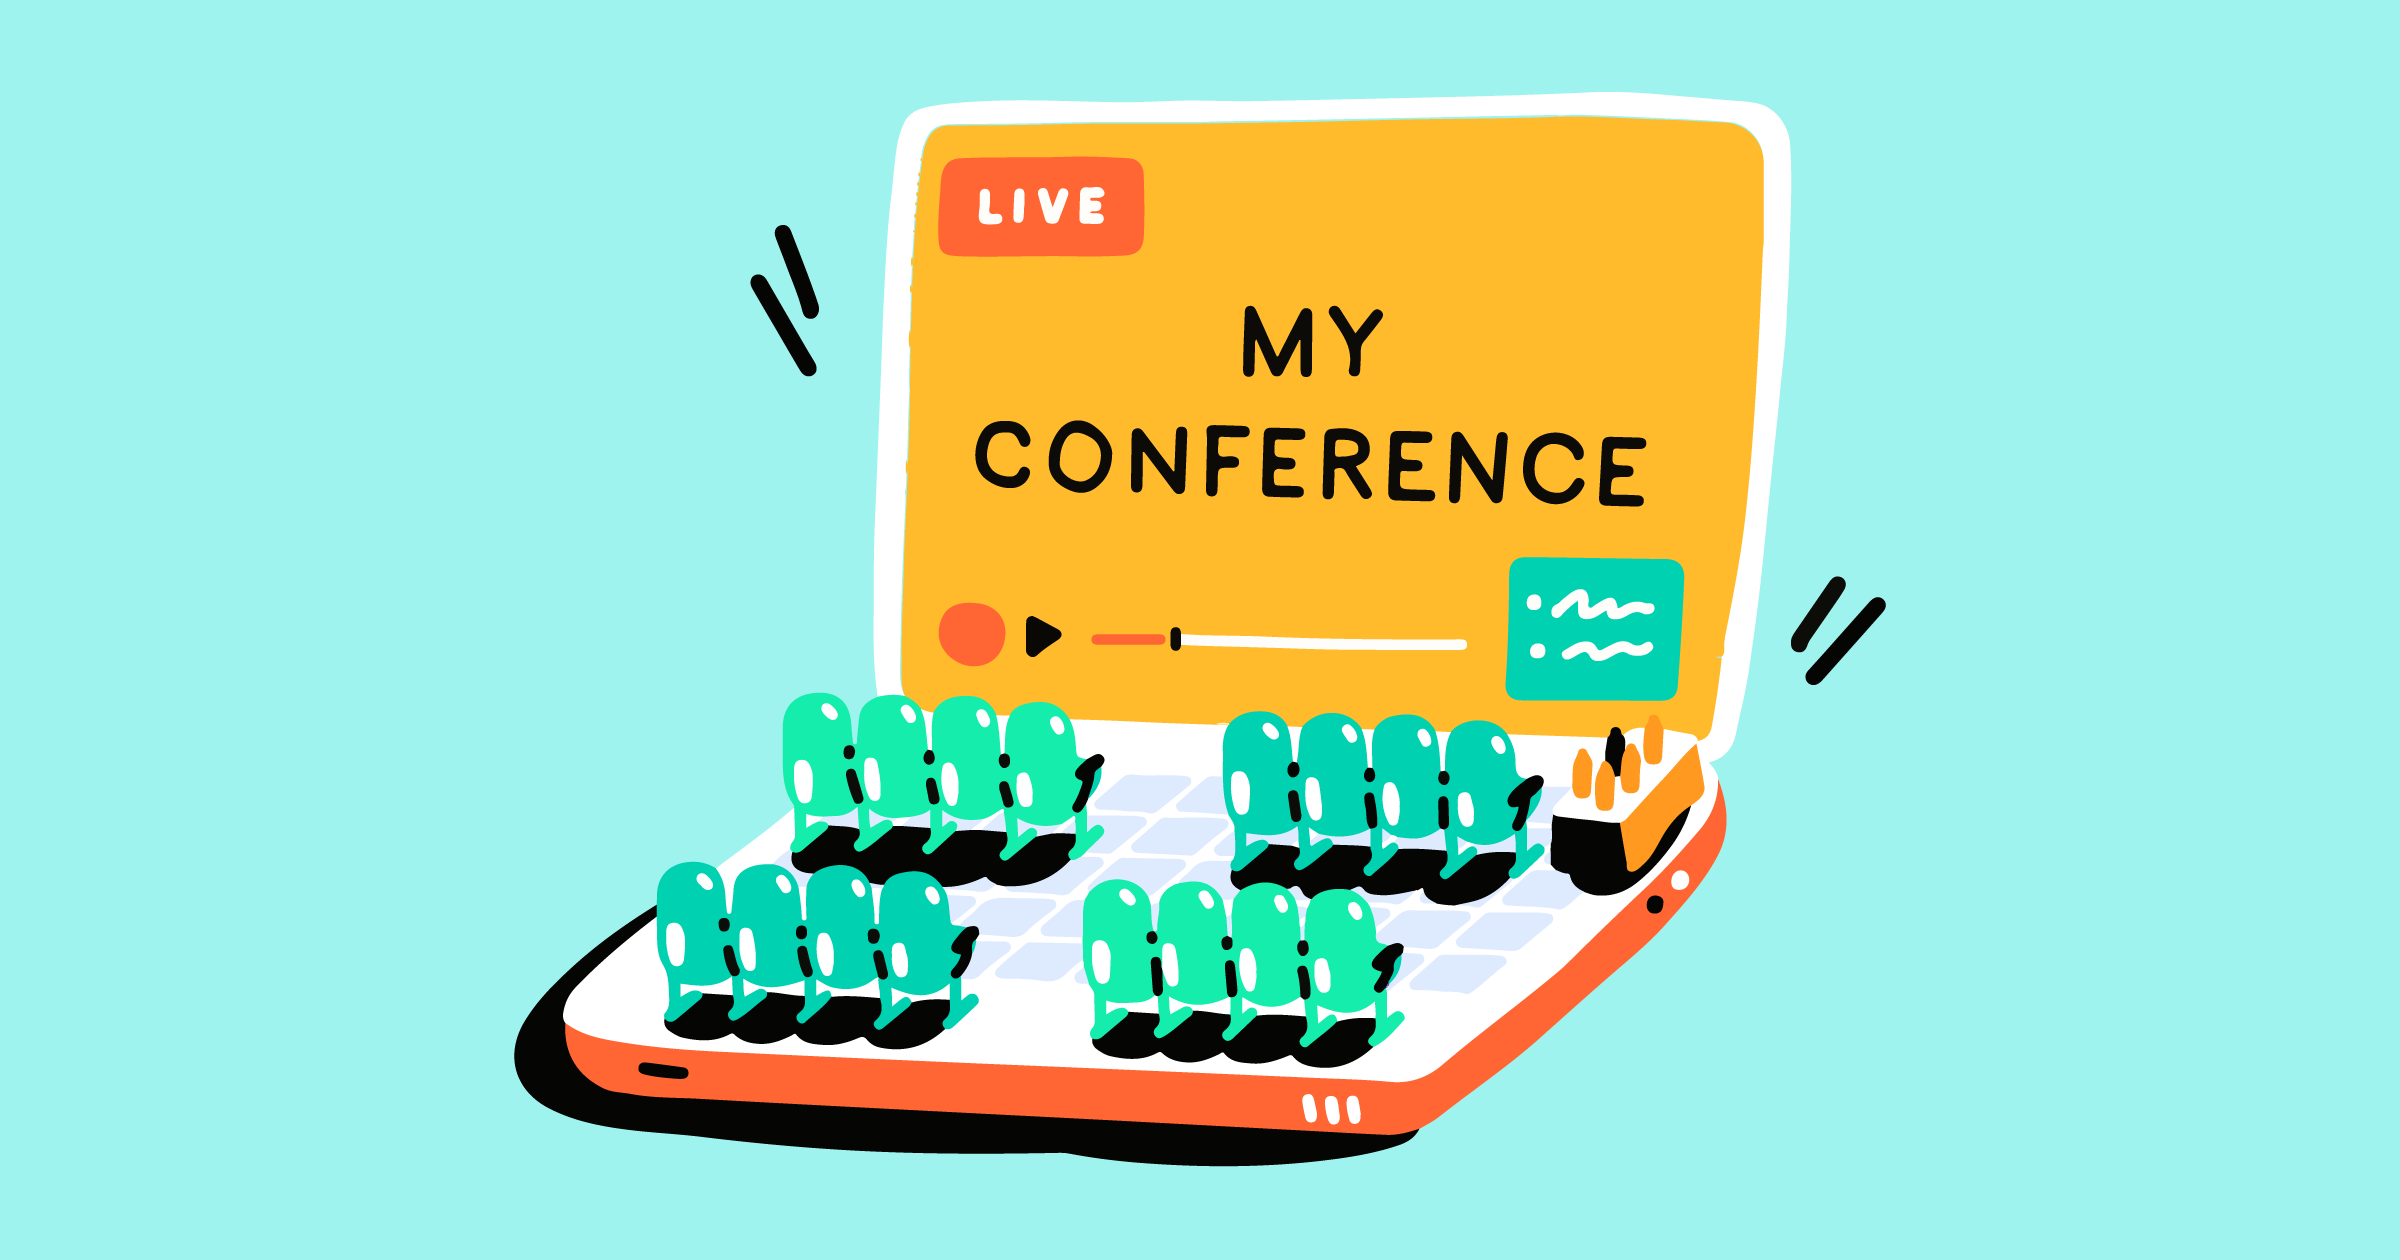 Live stream a conference: get global attendance for your event